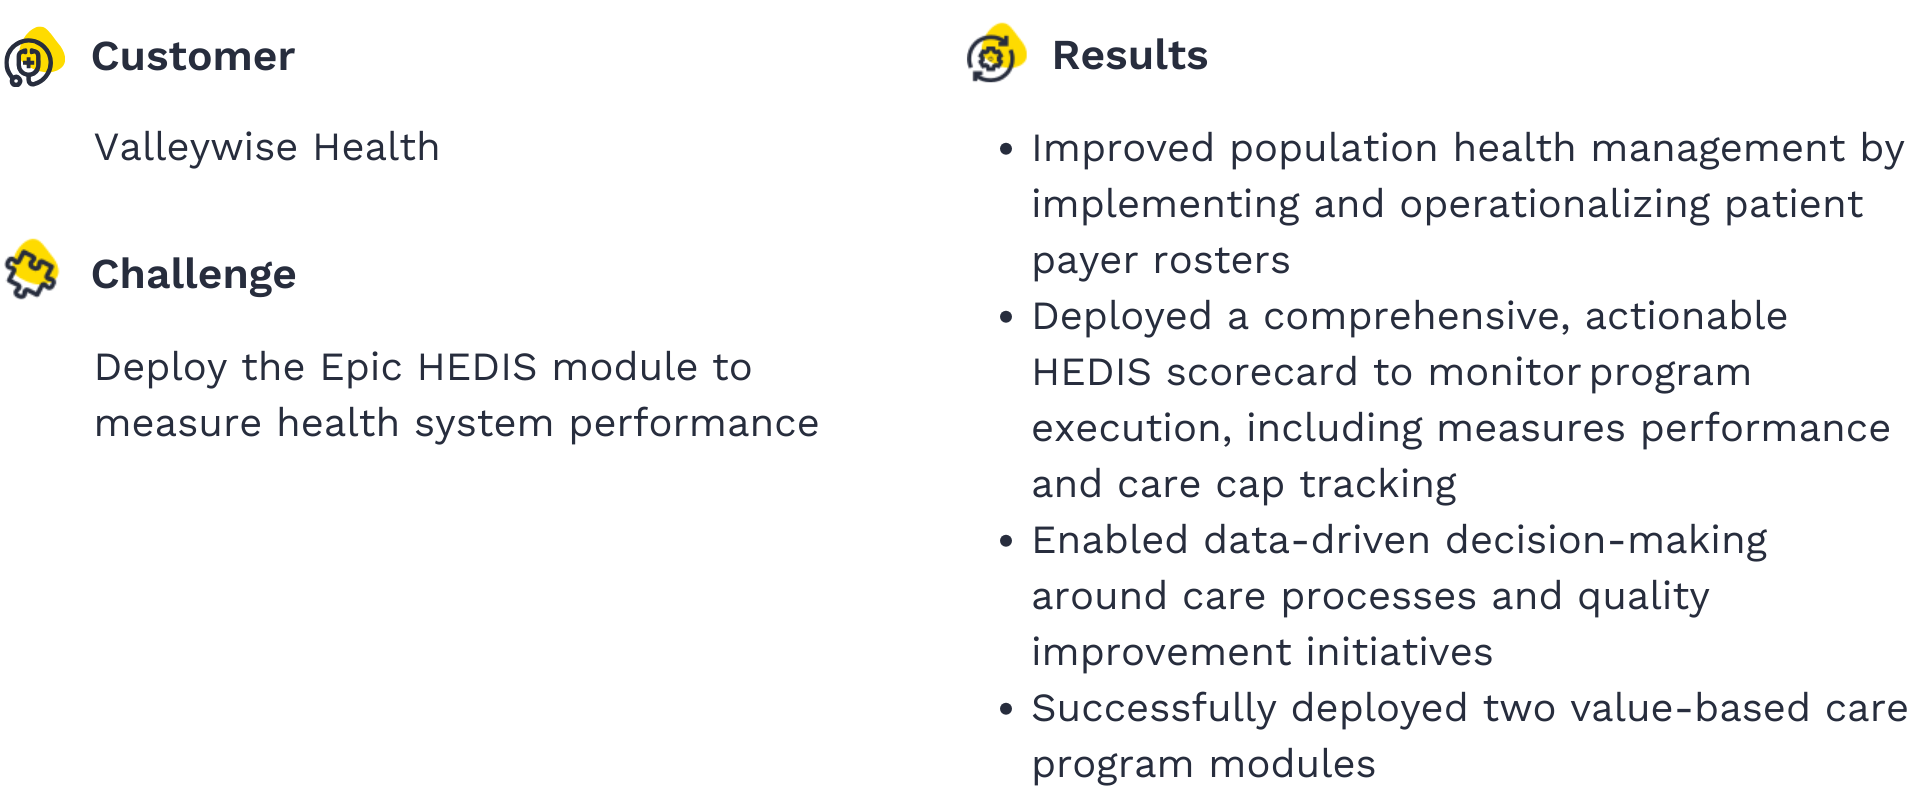 Valleywise Health achieved enhanced population health management and data-driven decision-making by deploying the Epic HEDIS module. Discover how they operationalized patient payer rosters, monitored performance with a comprehensive HEDIS scorecard, and implemented two value-based care program modules for improved healthcare outcomes.